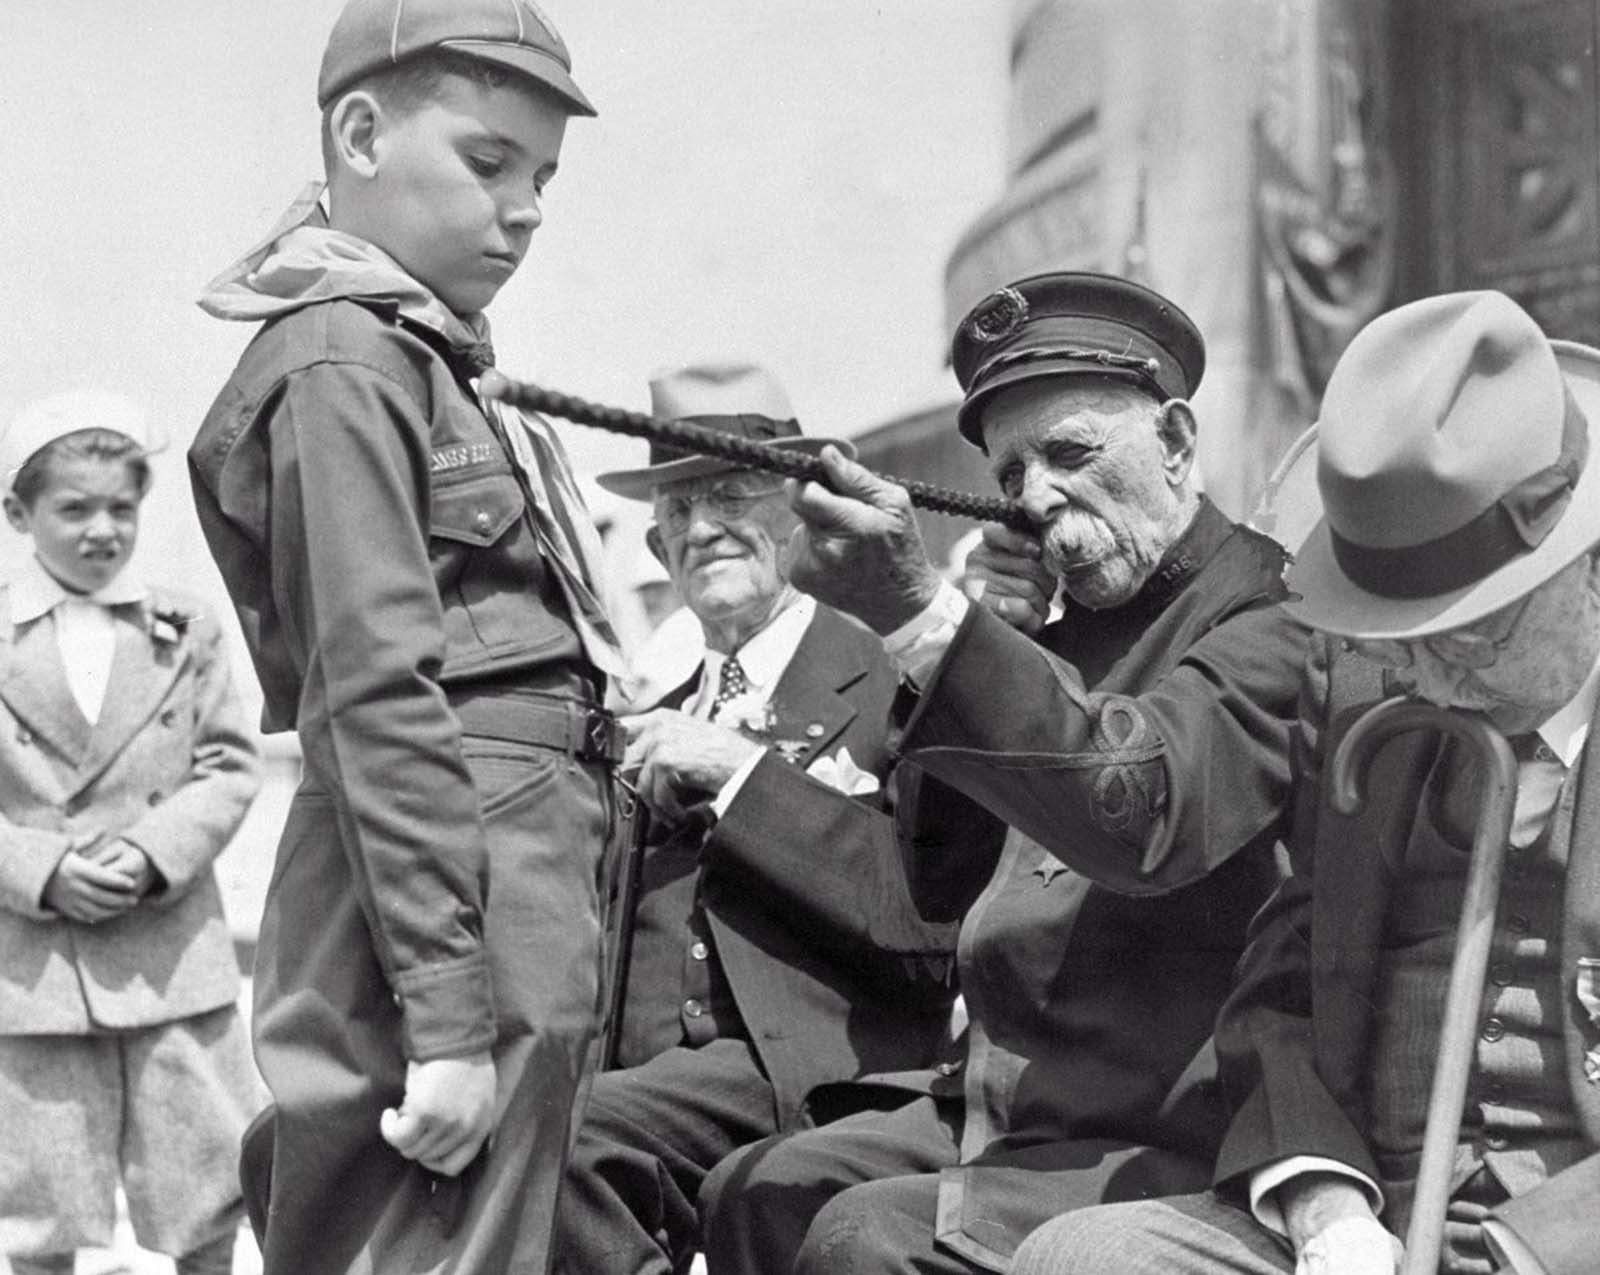 At the Memorial Day parade, Civil War veteran, George W. Collier, 97, shows Alwin Sharr, 9, a boy scout cub, how he aimed his rifle during the war. 1939.